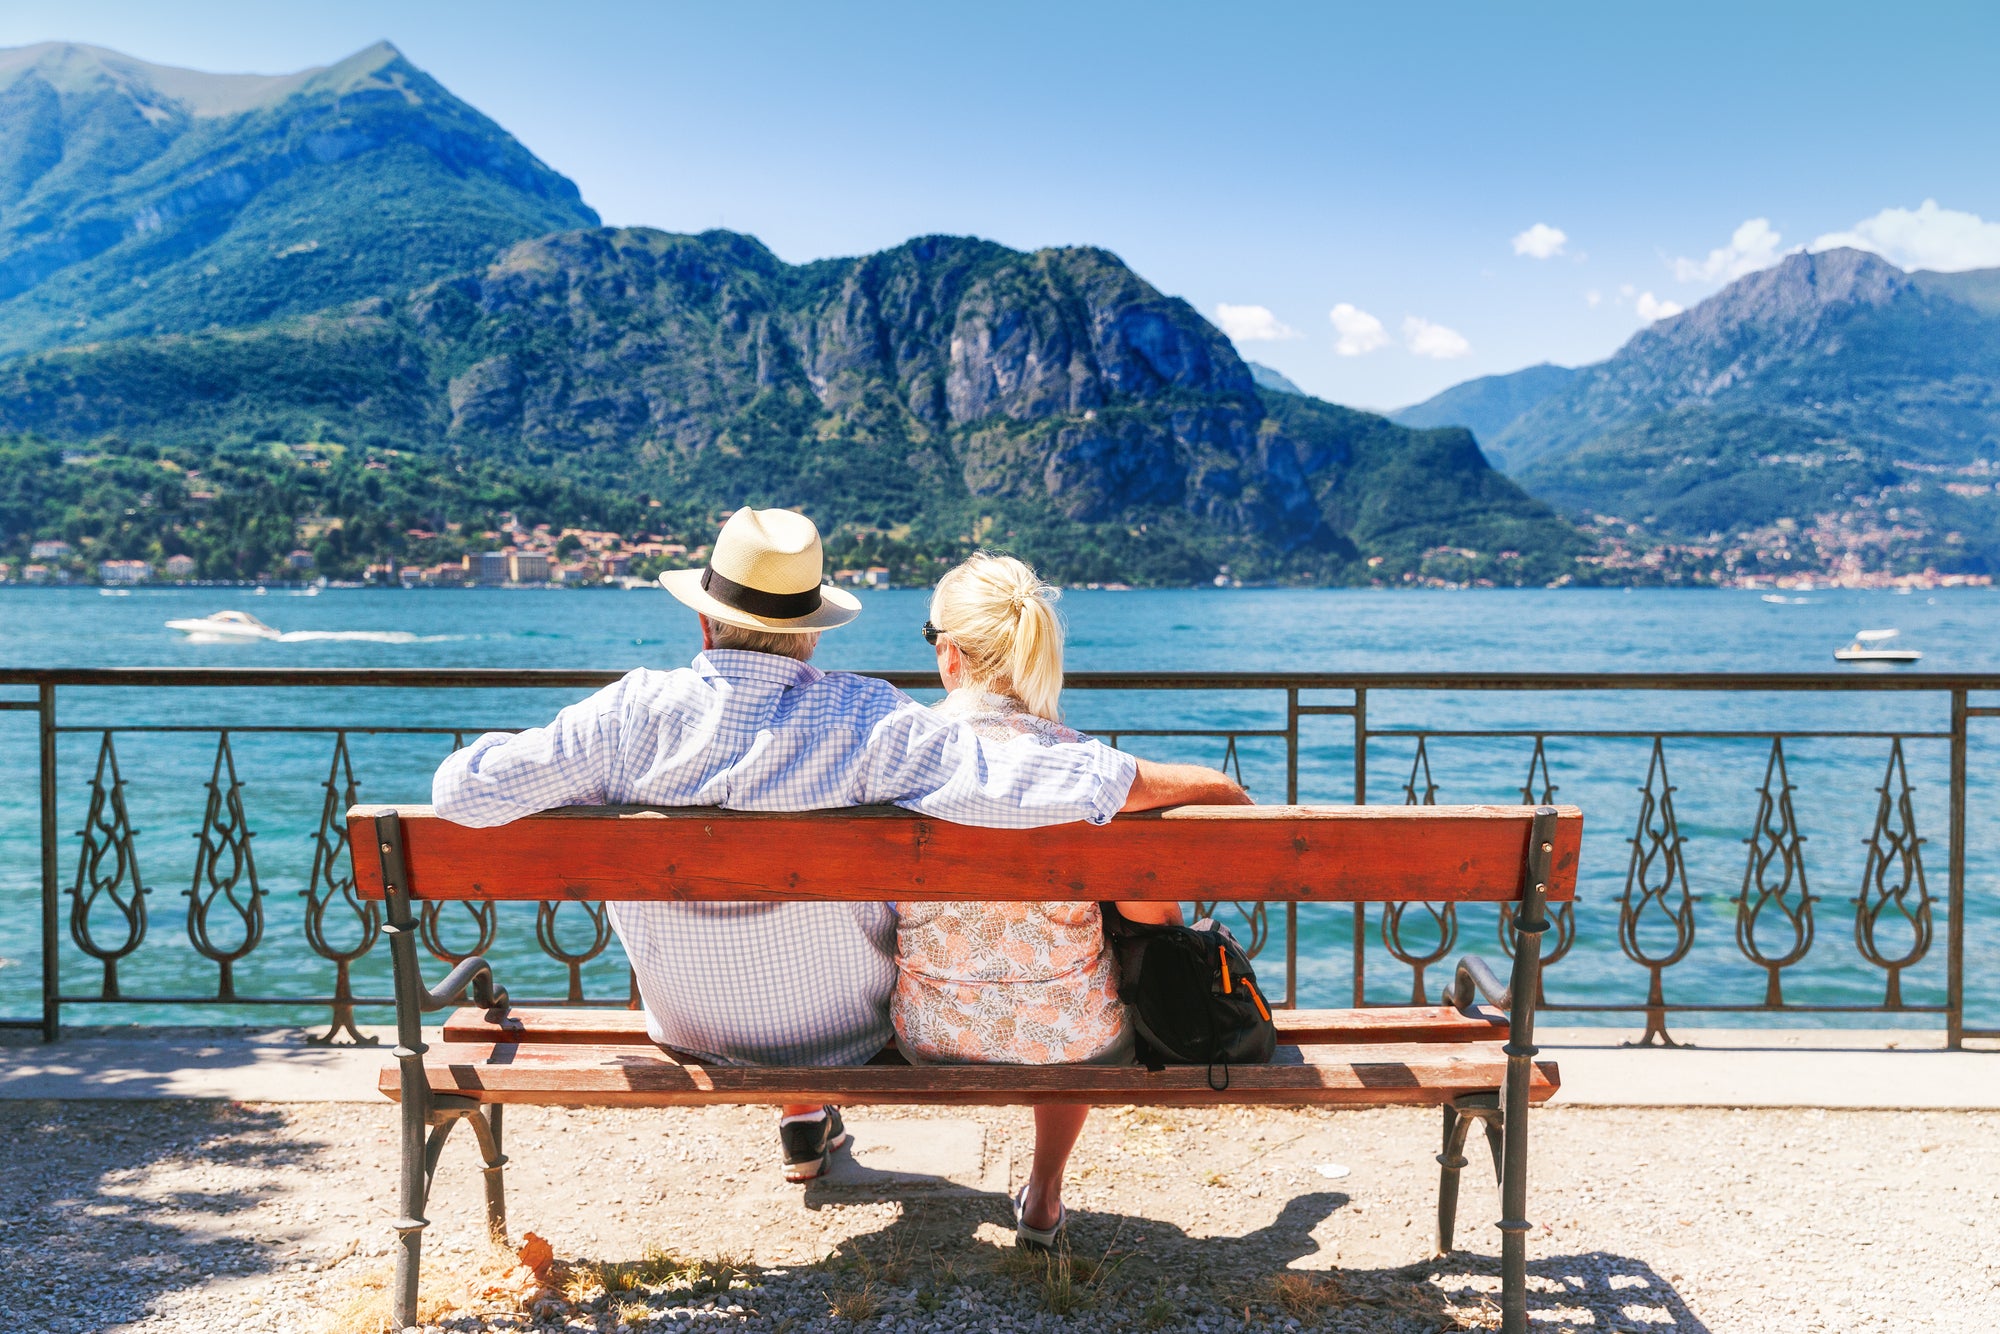 A couple sitting at a bench facing the mountains and a lake.